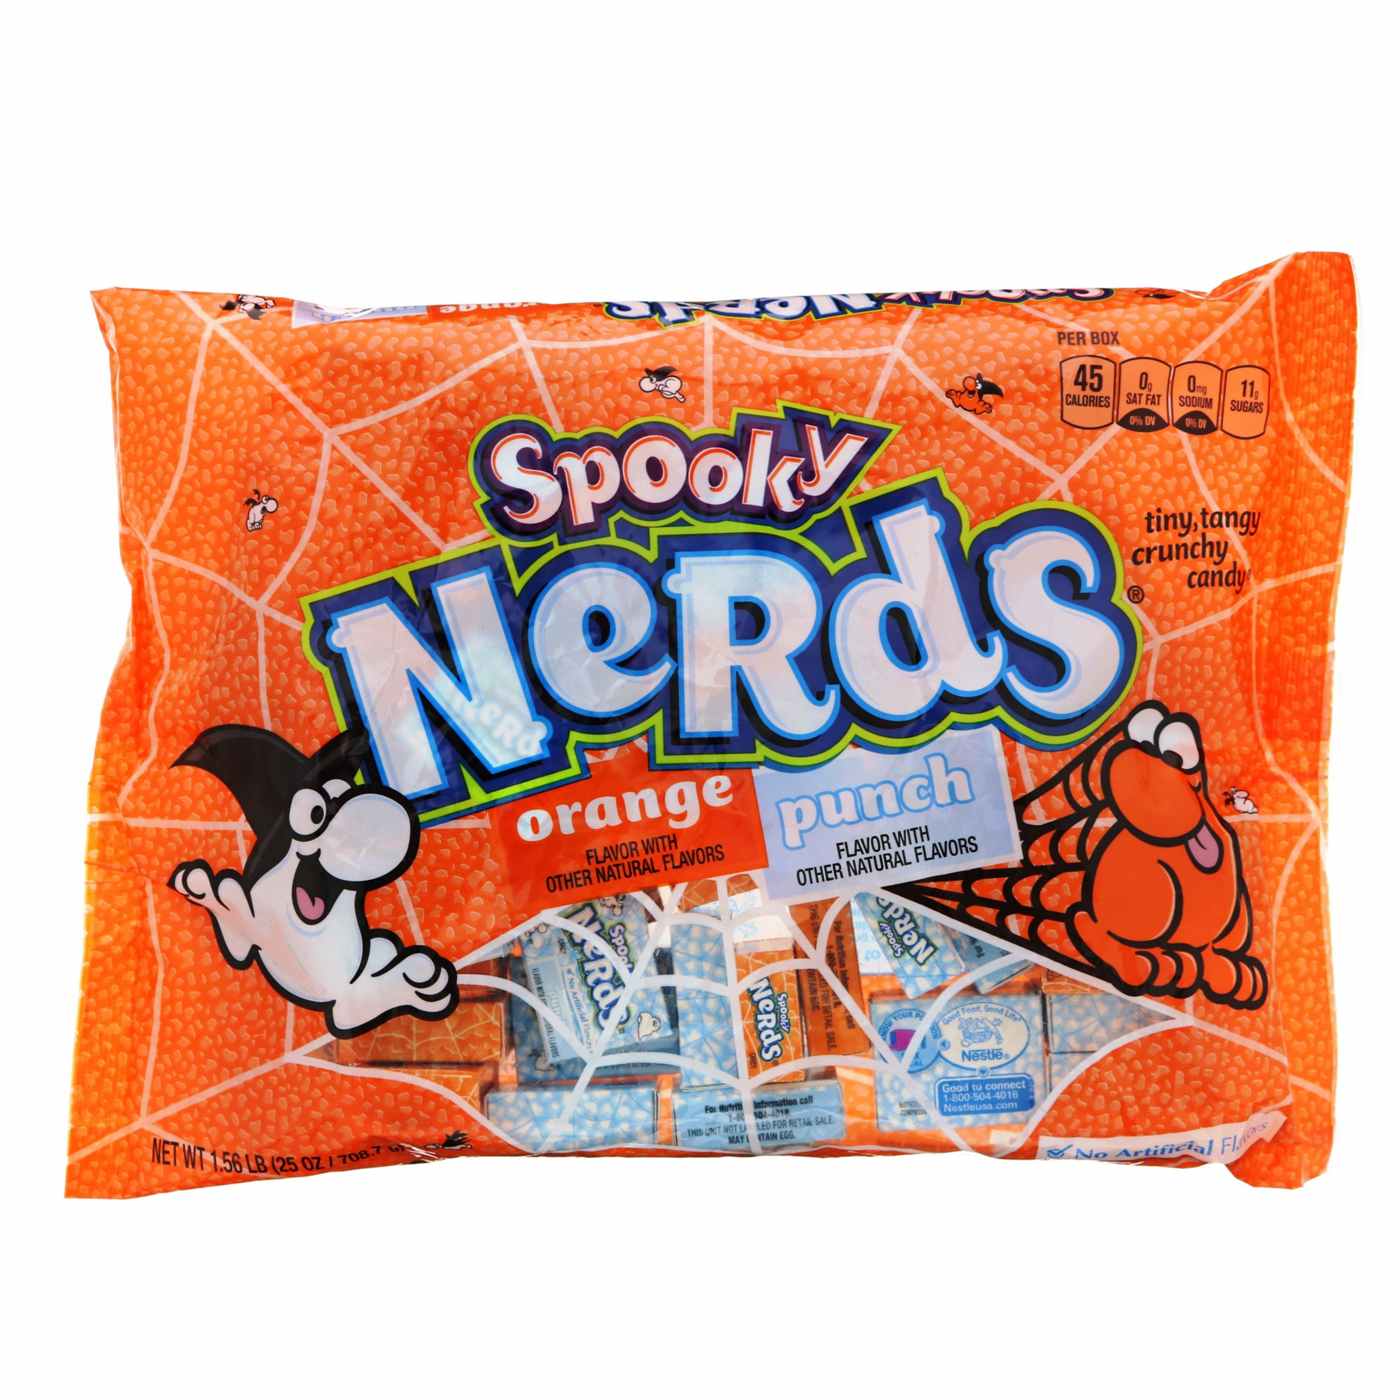 Nerds Spooky Orange and Punch Assortment; image 1 of 2